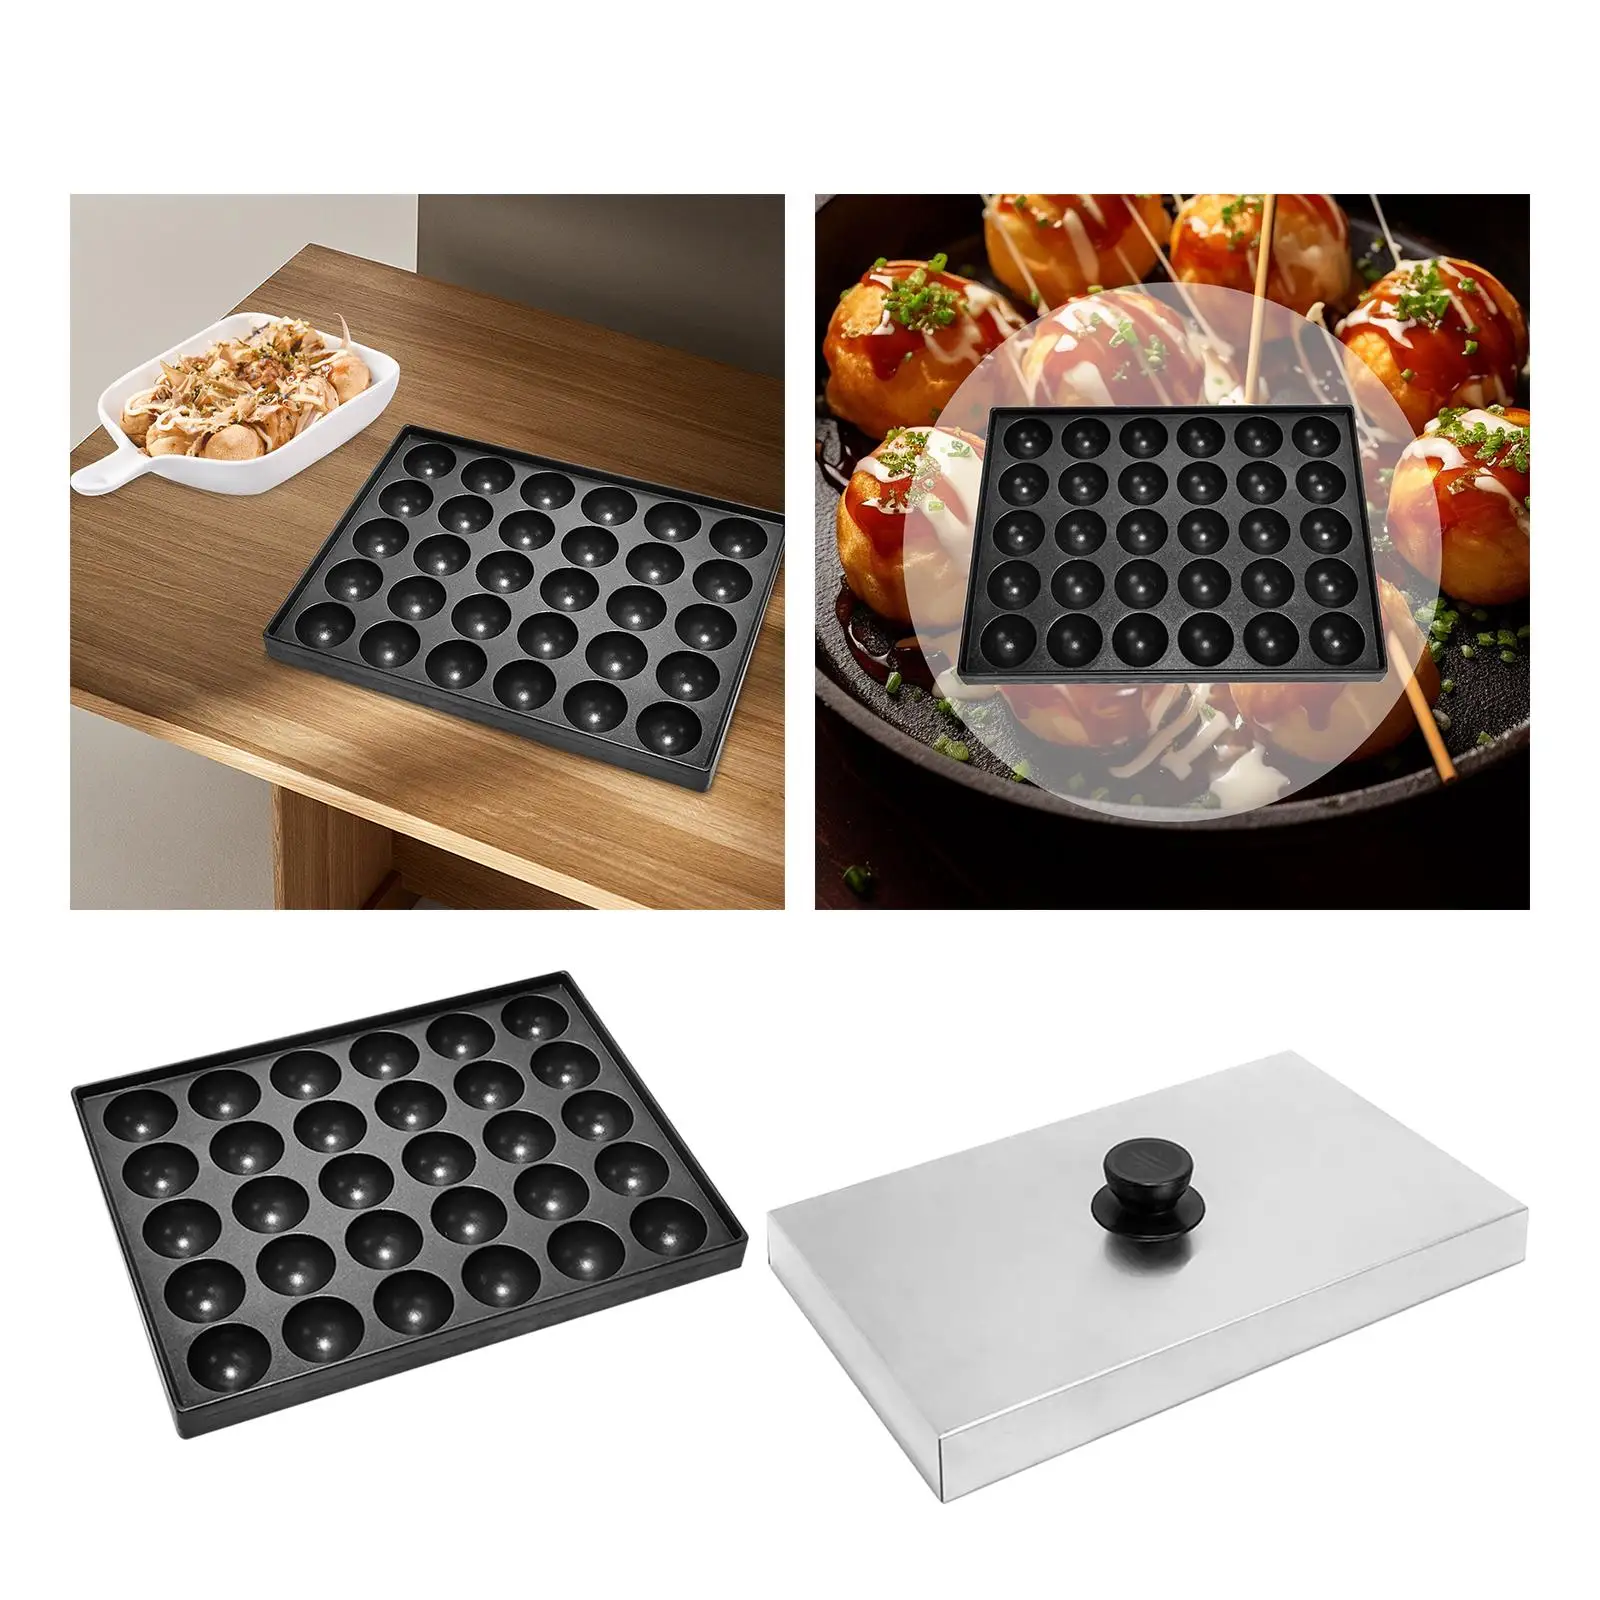 Octopus Meatball Grill Pan Octopus Ball Maker for Barbecue Kitchen Outdoor